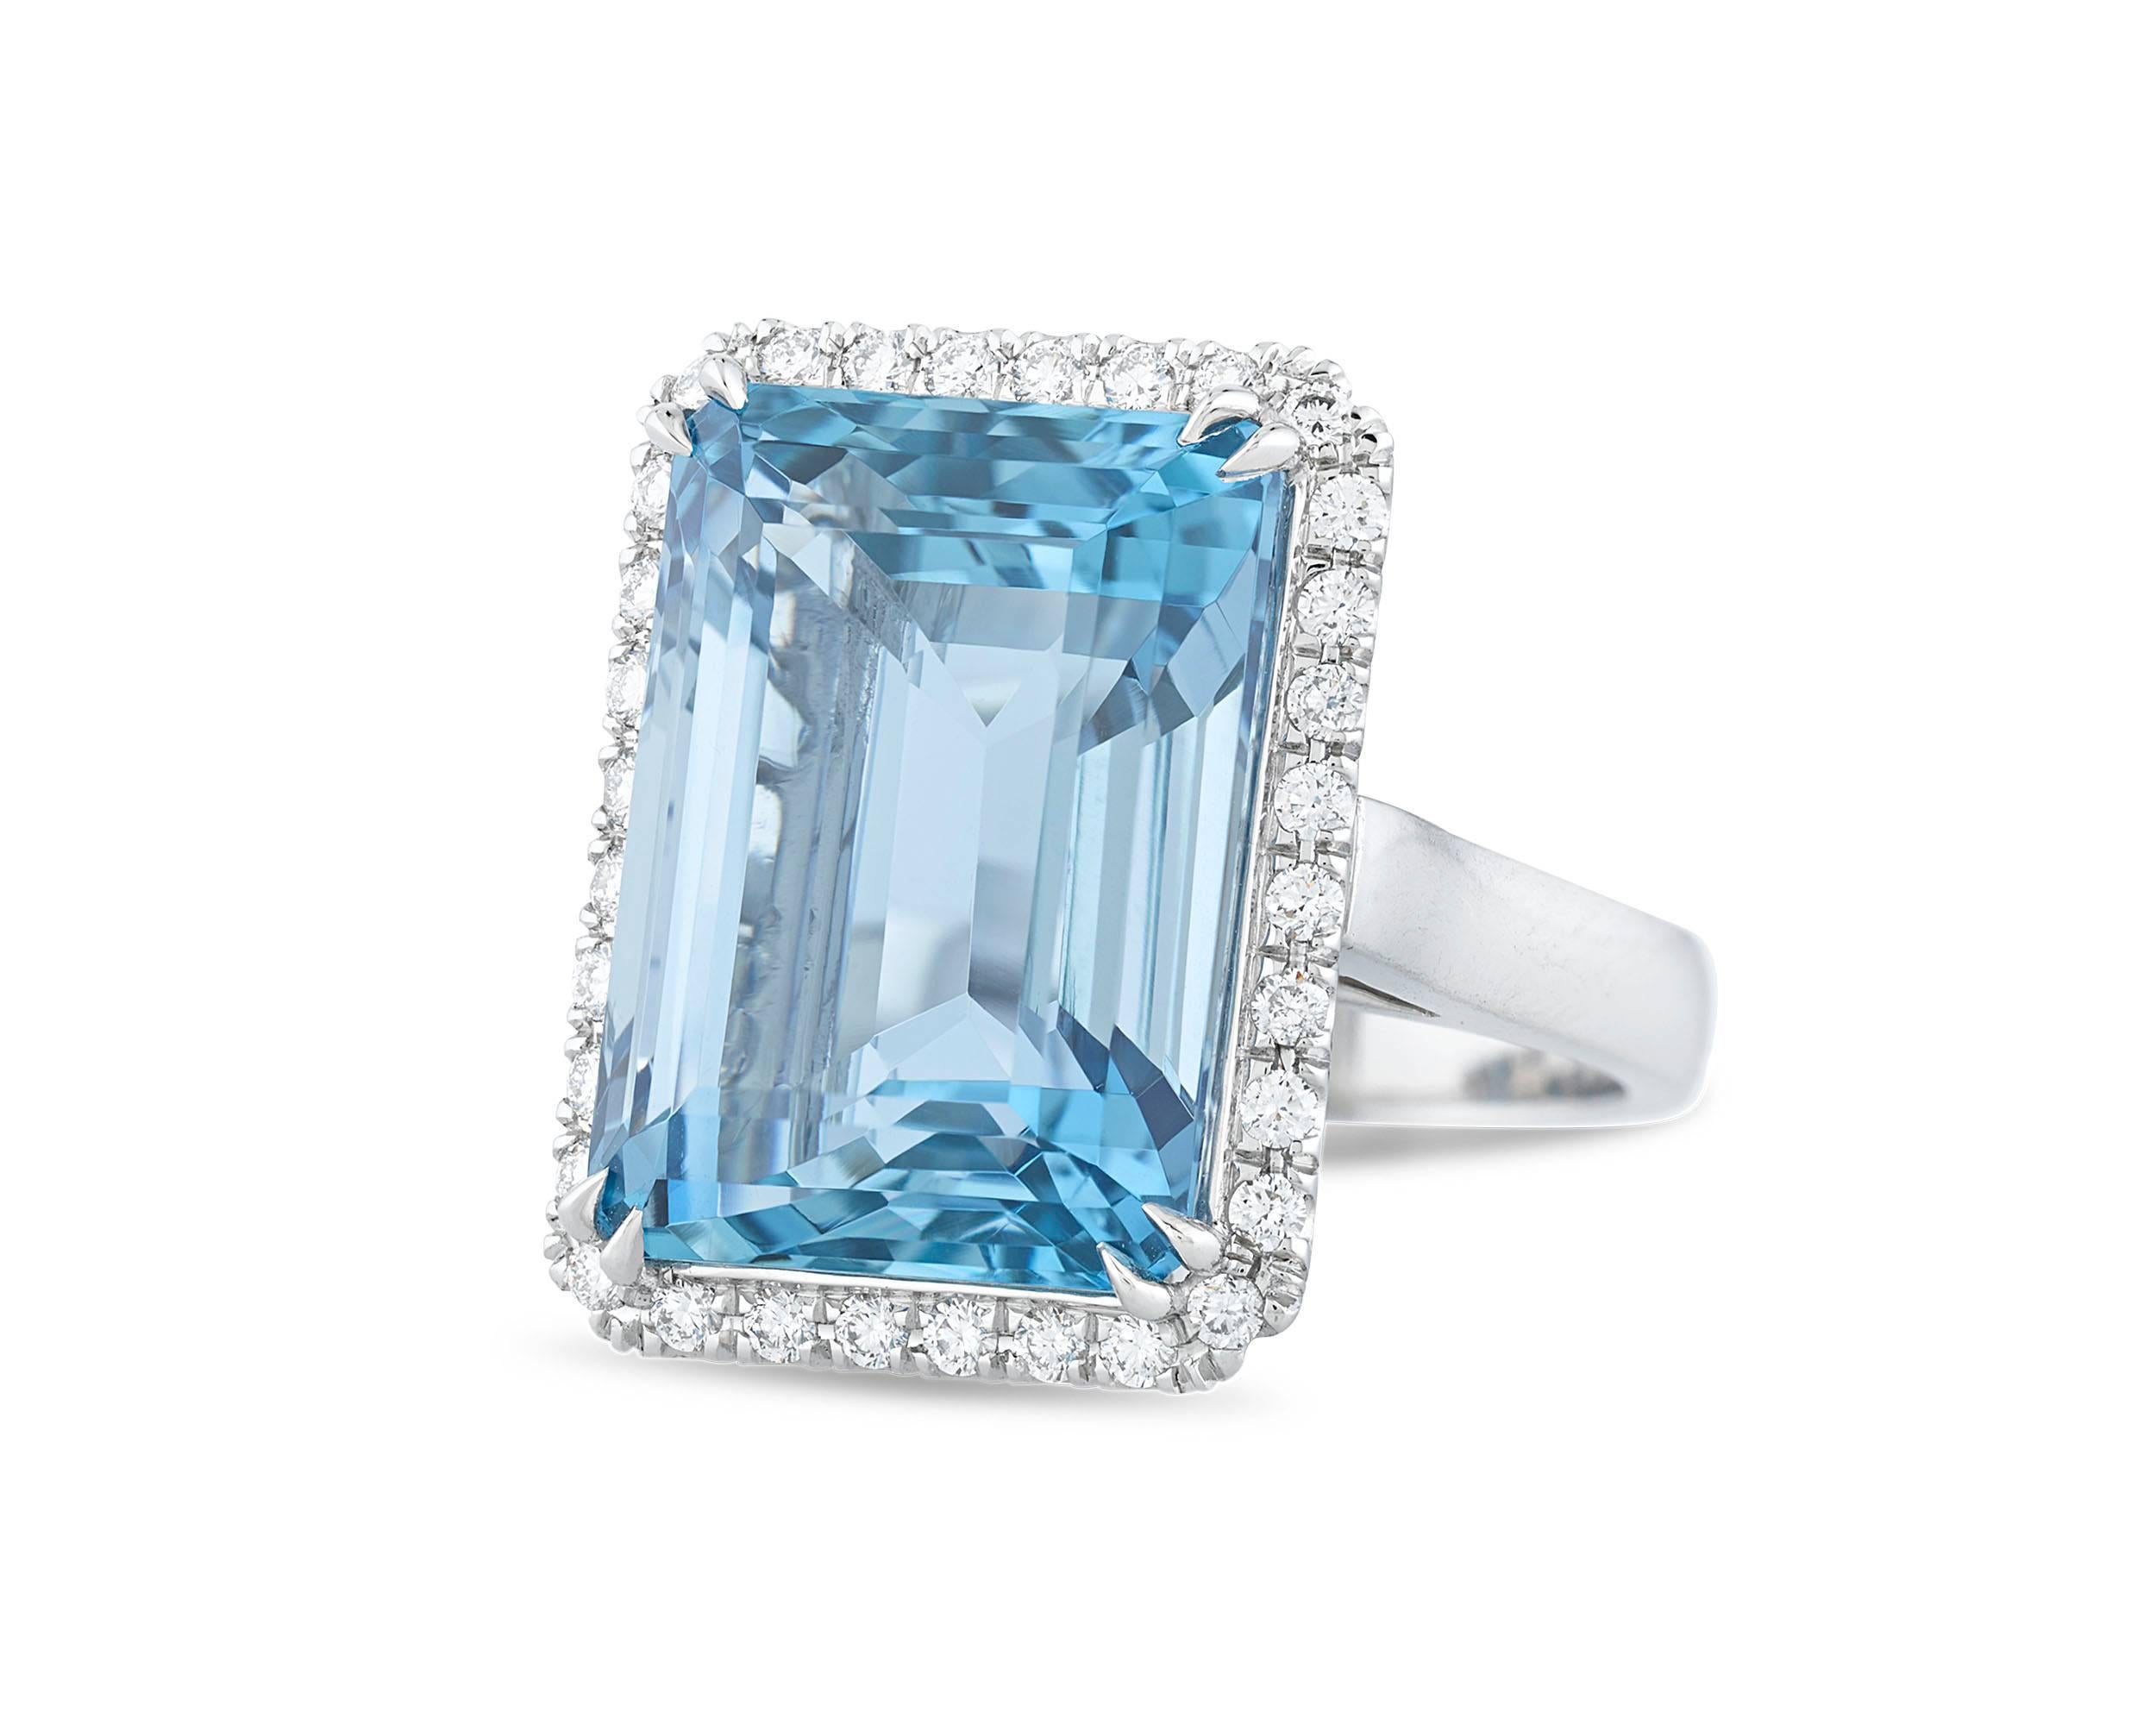 The emerald cut of this incredible 19.44-carat aquamarine is the perfect means by which to showcase this gemstone's marvelous clarity and color. Surrounded by 32 shimmering white diamonds weighing 0.47 carats, this jewel possesses the optimal